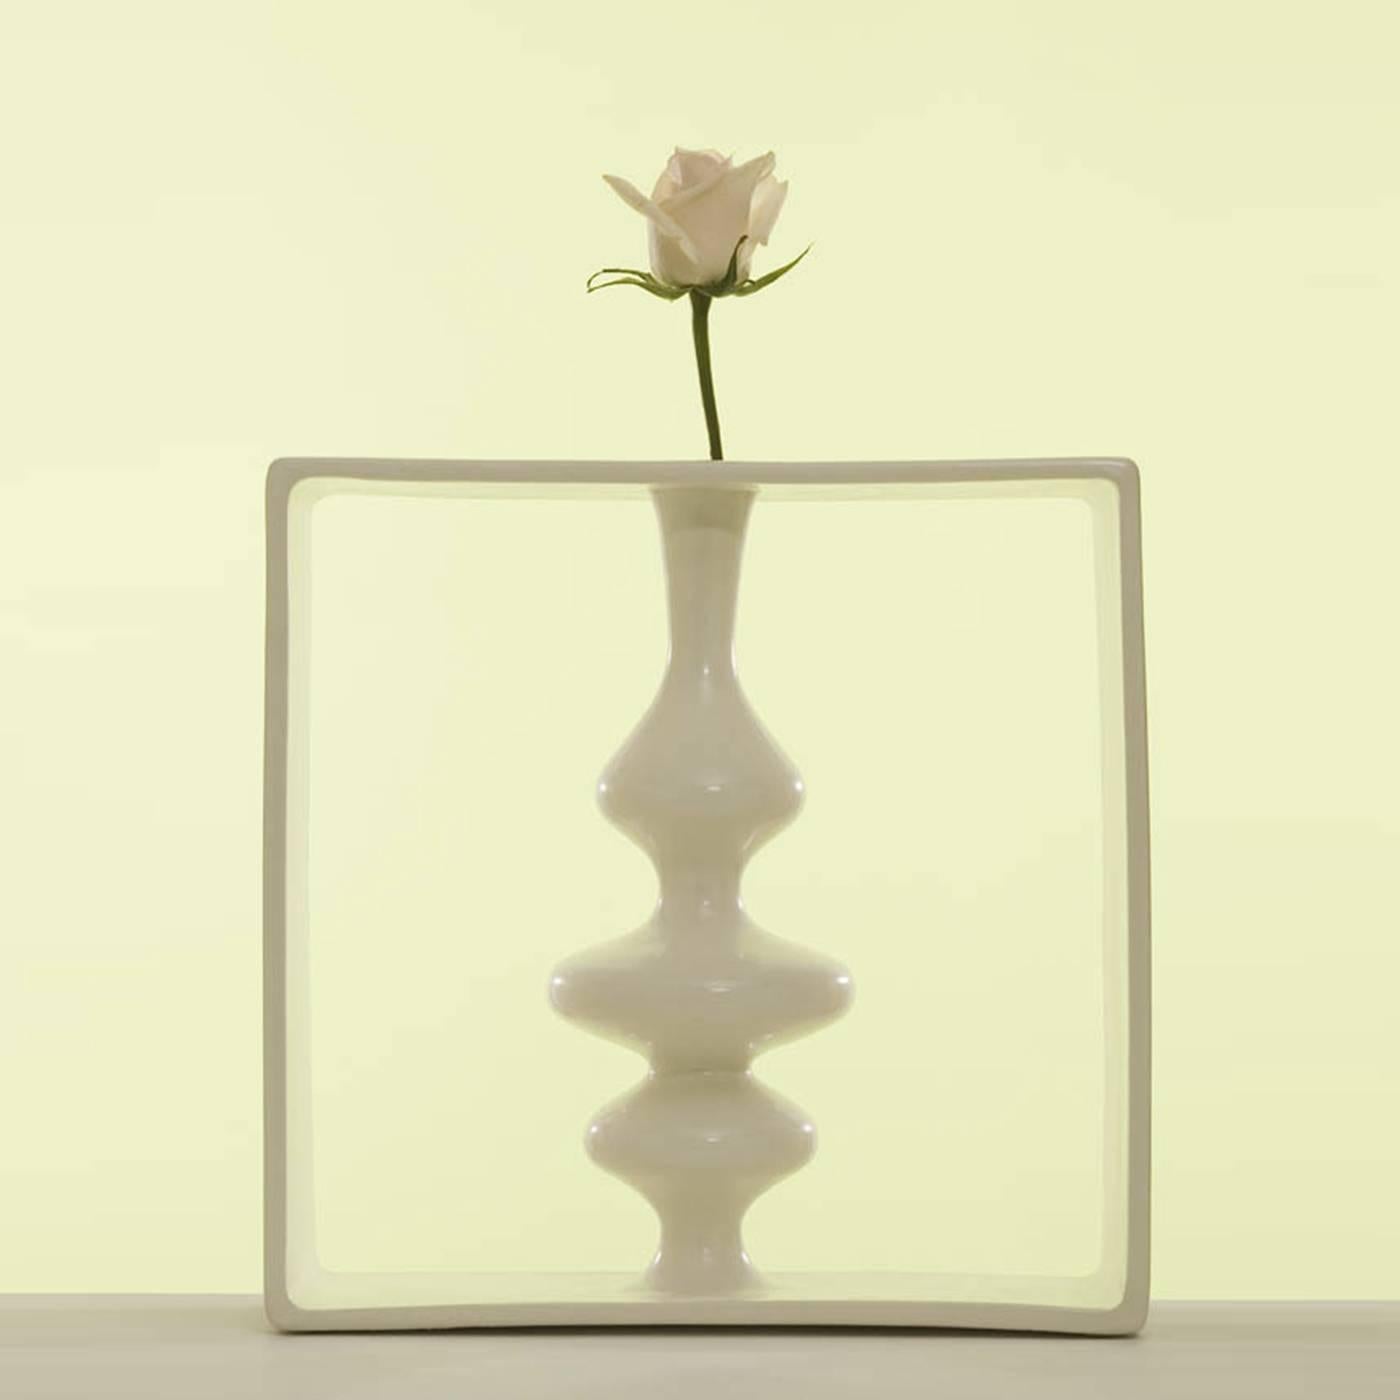 This delicate white ceramic vase was designed by Andrea Branzi for Superego and is part of a collection of 18 vases, all encapsulated within a frame. This design is part of a limited series of 50 pieces, all numbered and signed, that creates an